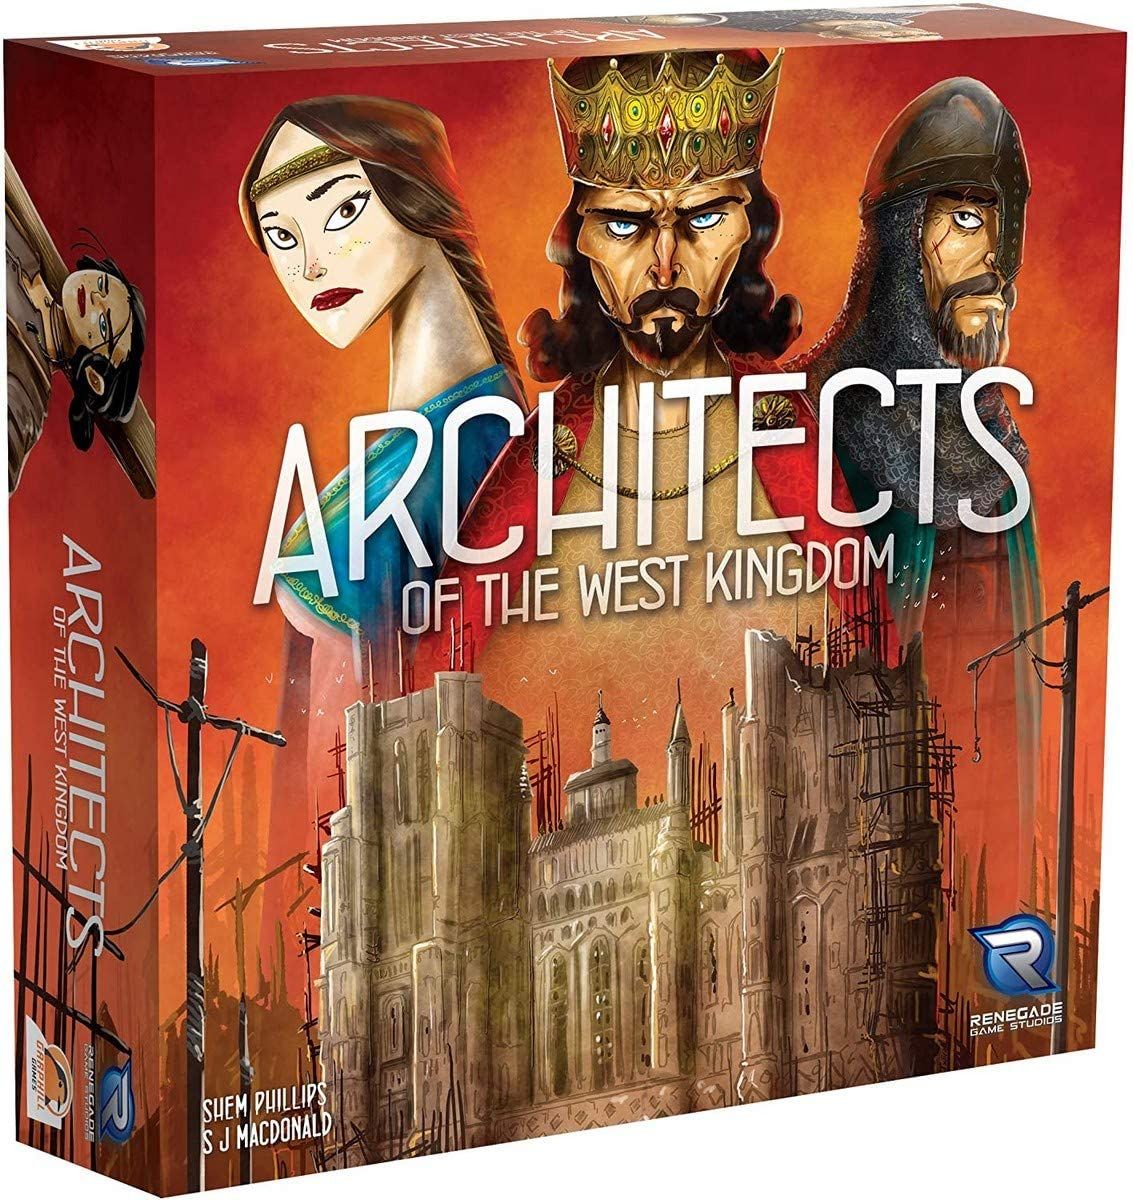 The front of the Architects of the West Kingdom game box features a kingdom and three cartoon protagonists from the game.